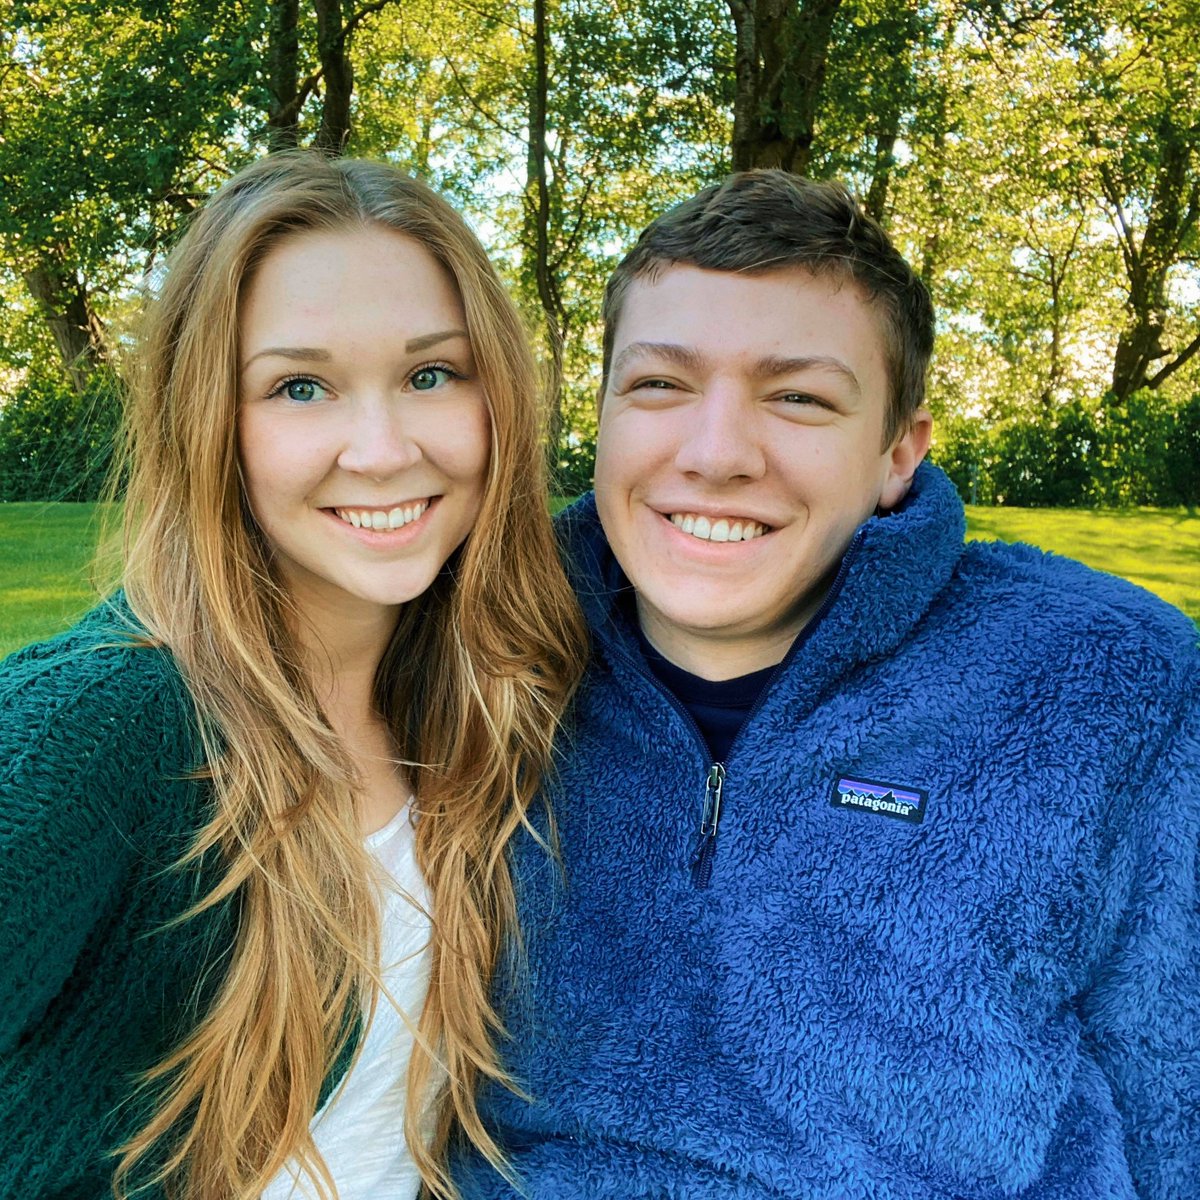 Meet Twyla & Austin.Tywla is from Langley, BC.Austin is from Bothell, WA.They are divided due to the border closure, but since Peace Arch Provincial Park has re-opened, they could spend time together this week.